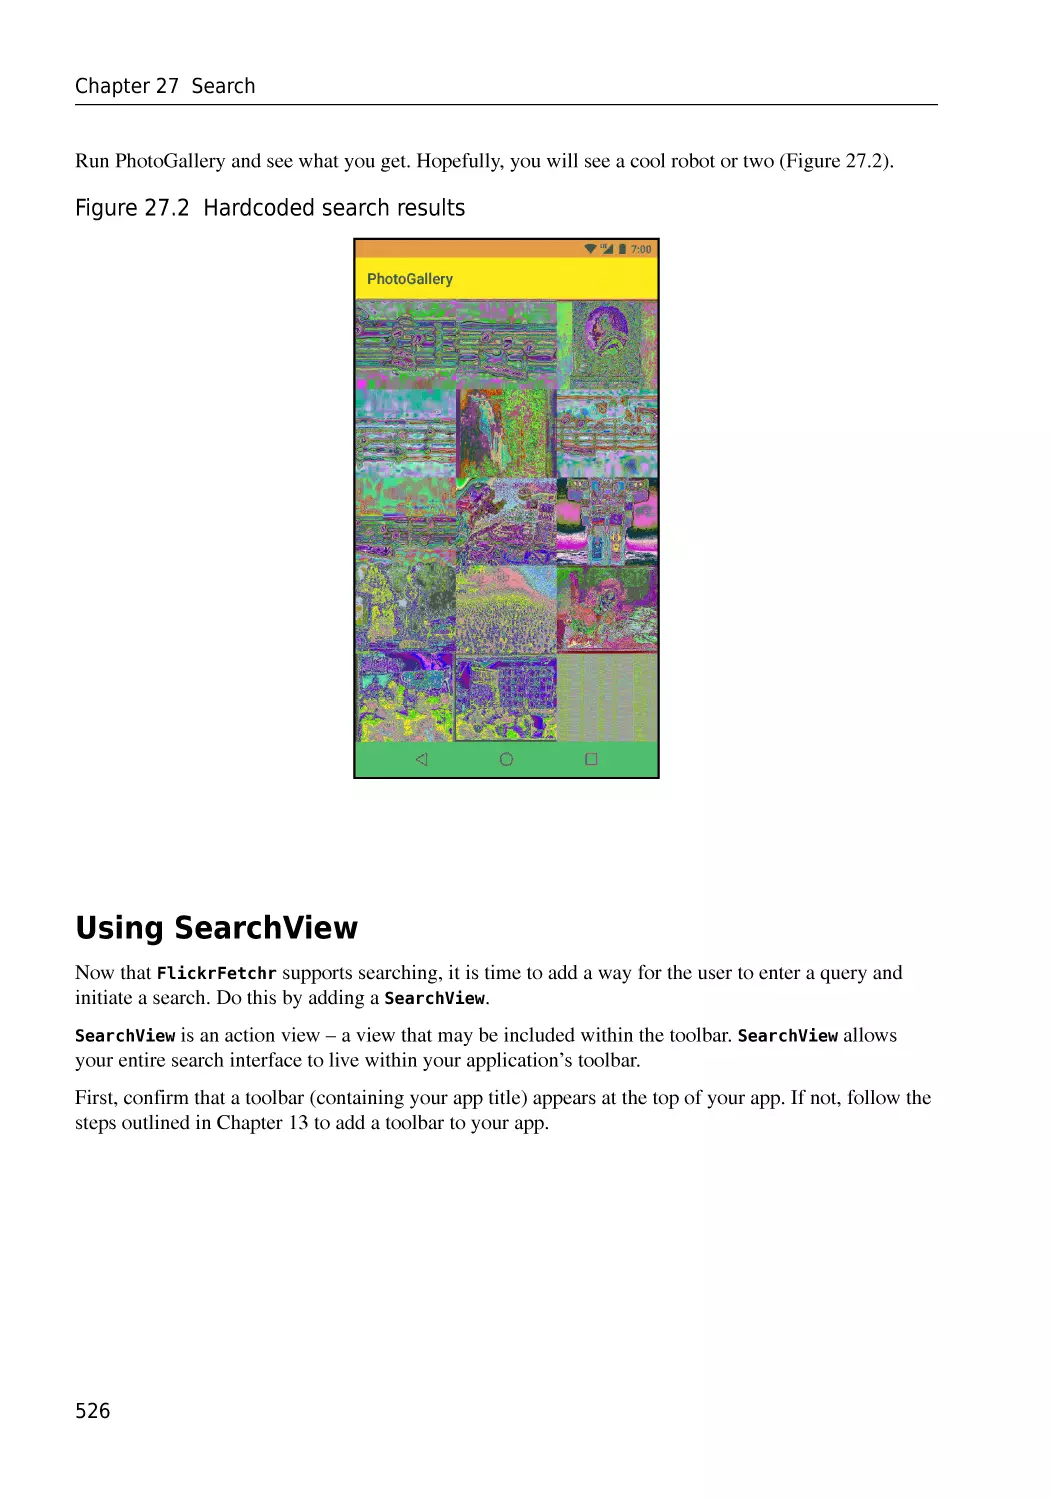 Using SearchView